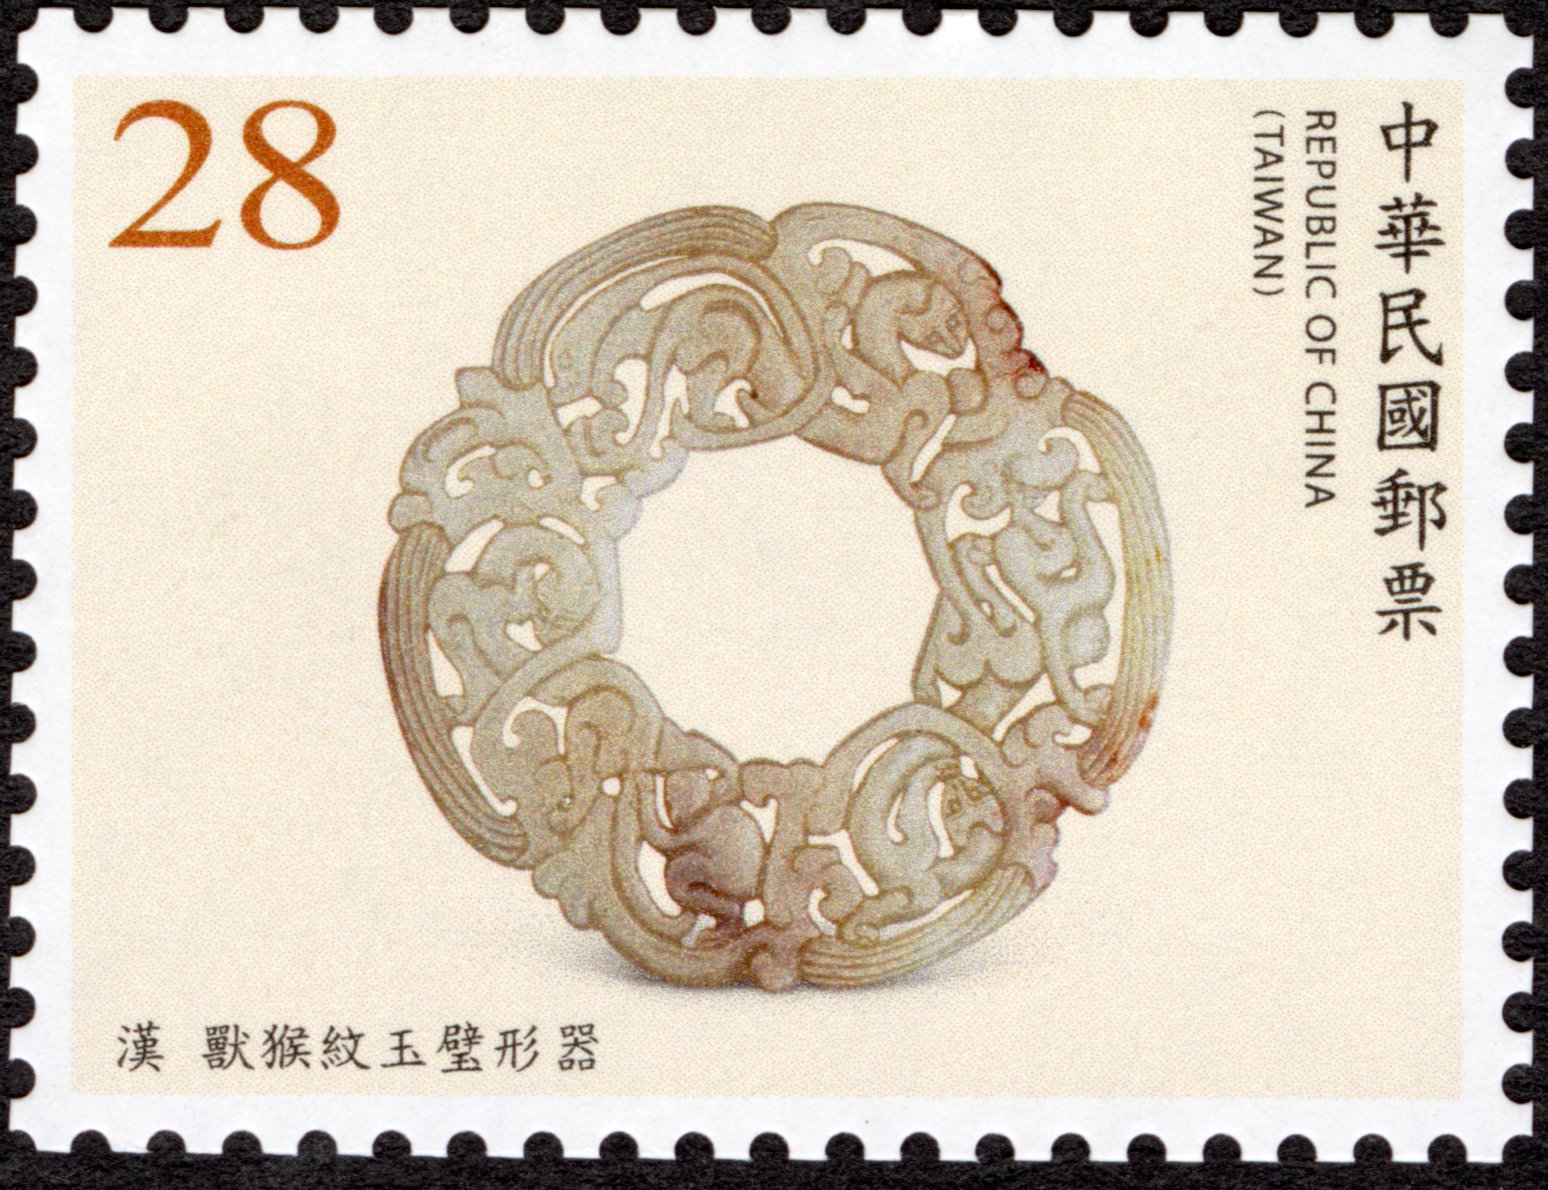 (Def.148.16)Def.148 Jade Articles from the National Palace Museum Postage Stamps (Continued III)